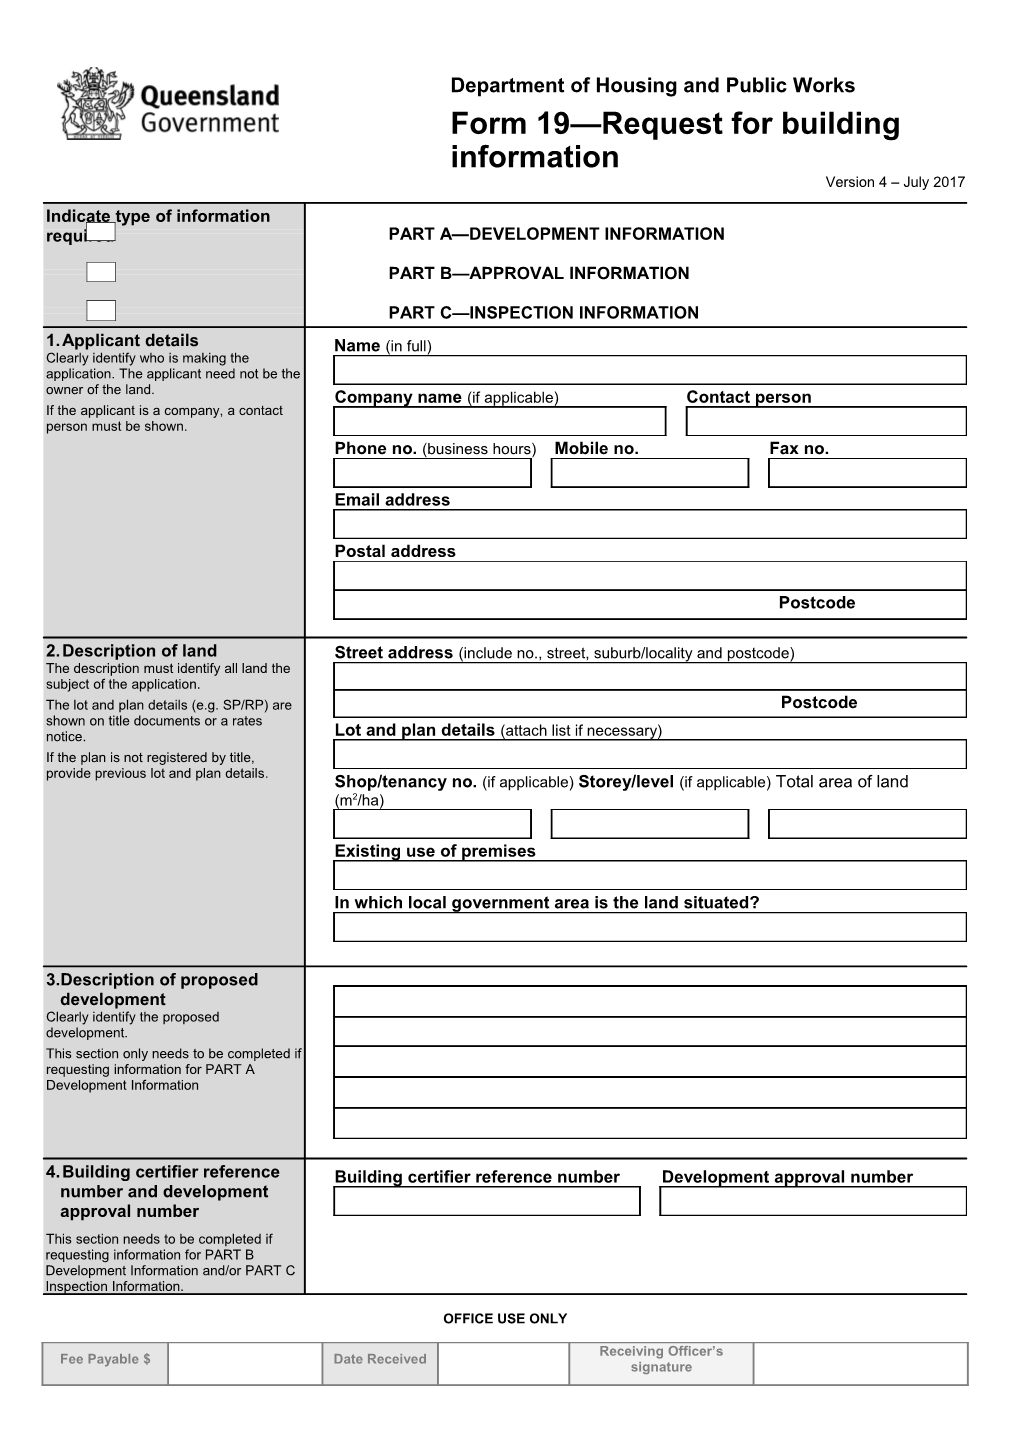 Form 19 Request for Building Information